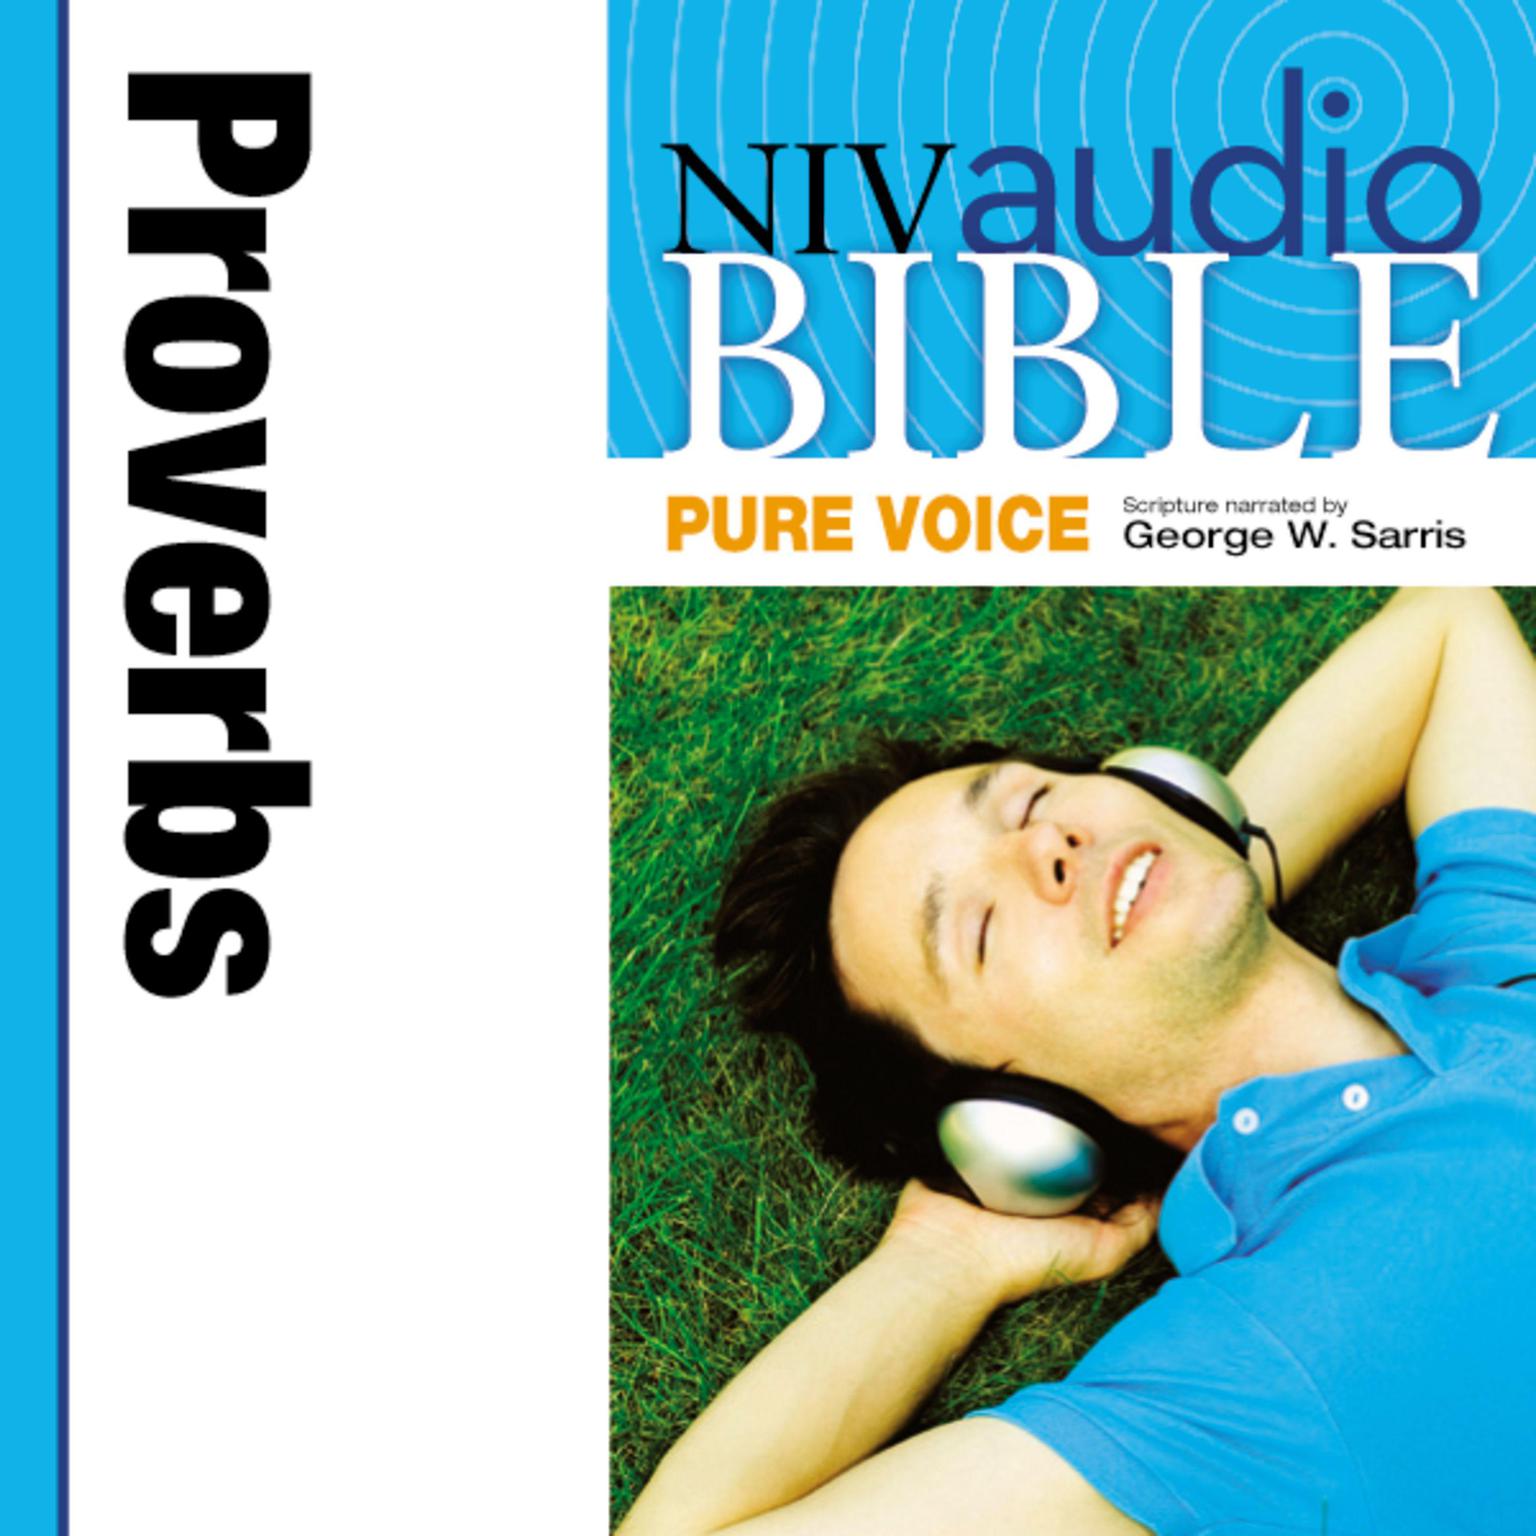 Pure Voice Audio Bible - New International Version, NIV (Narrated by George W. Sarris): Proverbs Audiobook, by Zondervan